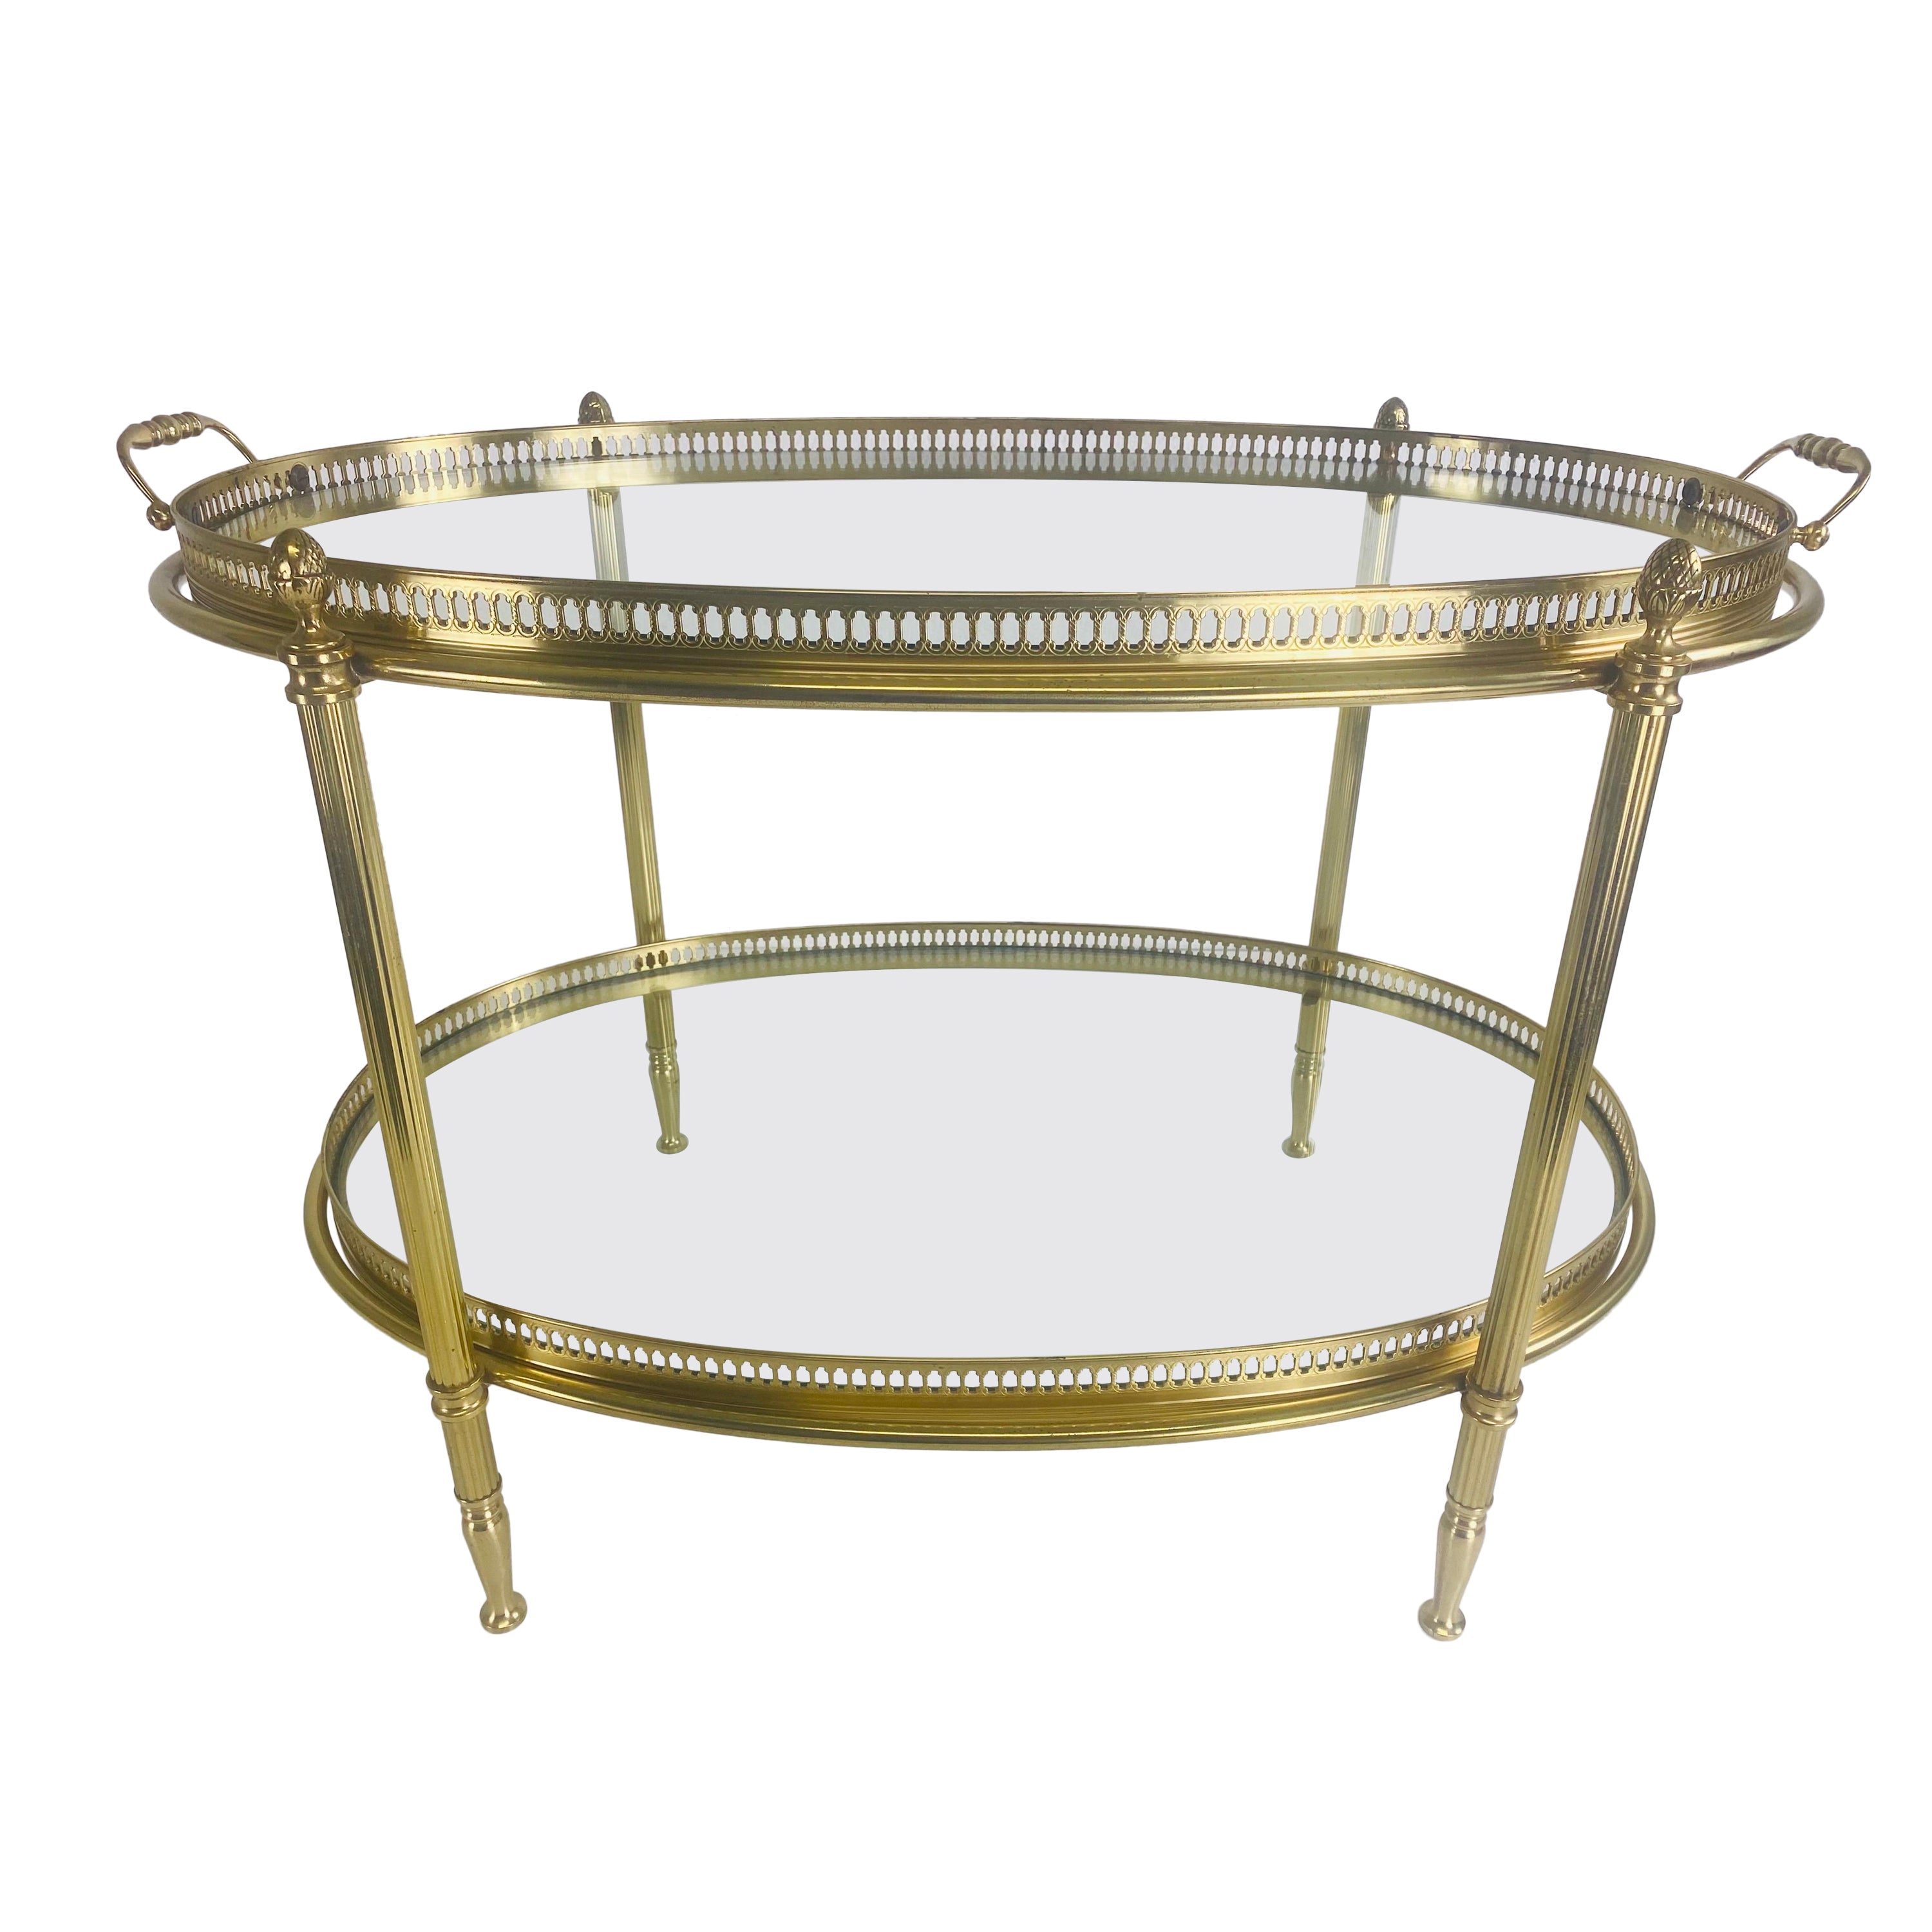 Handsome mid century solid brass Italian tray table after Maison Jansen